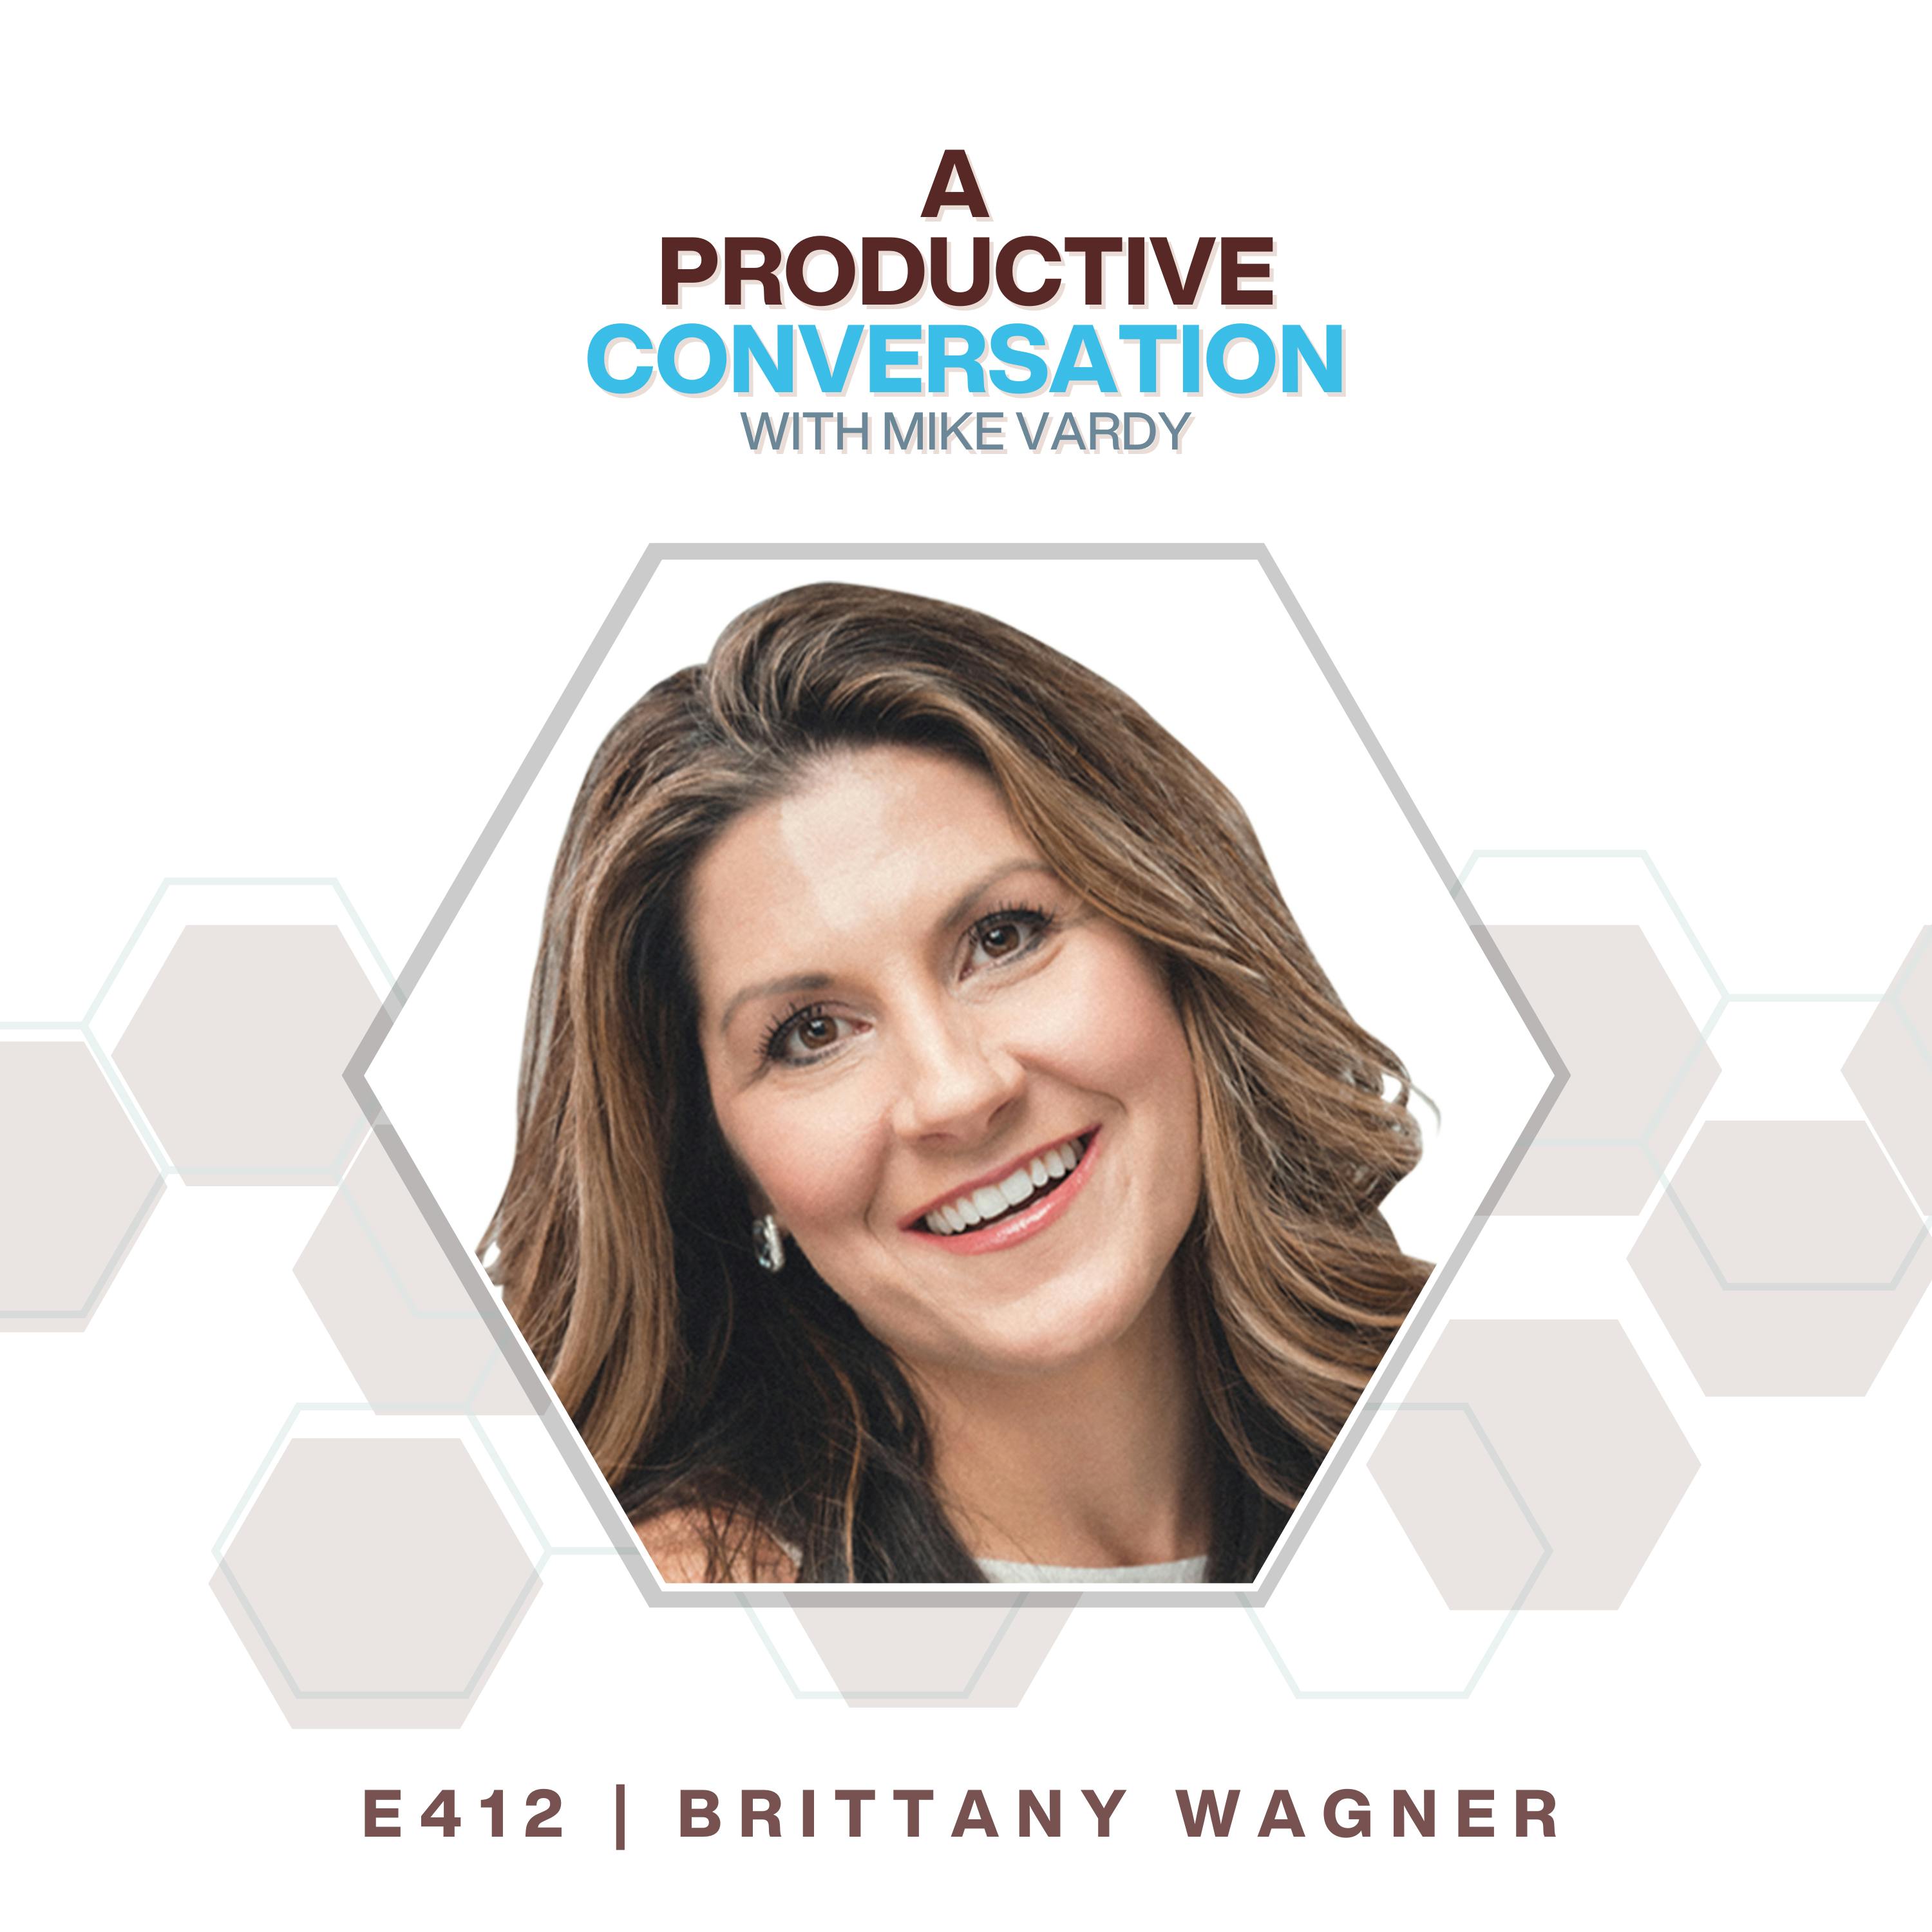 Brittany Wagner talks about not giving up, taking a chance, and vulnerability